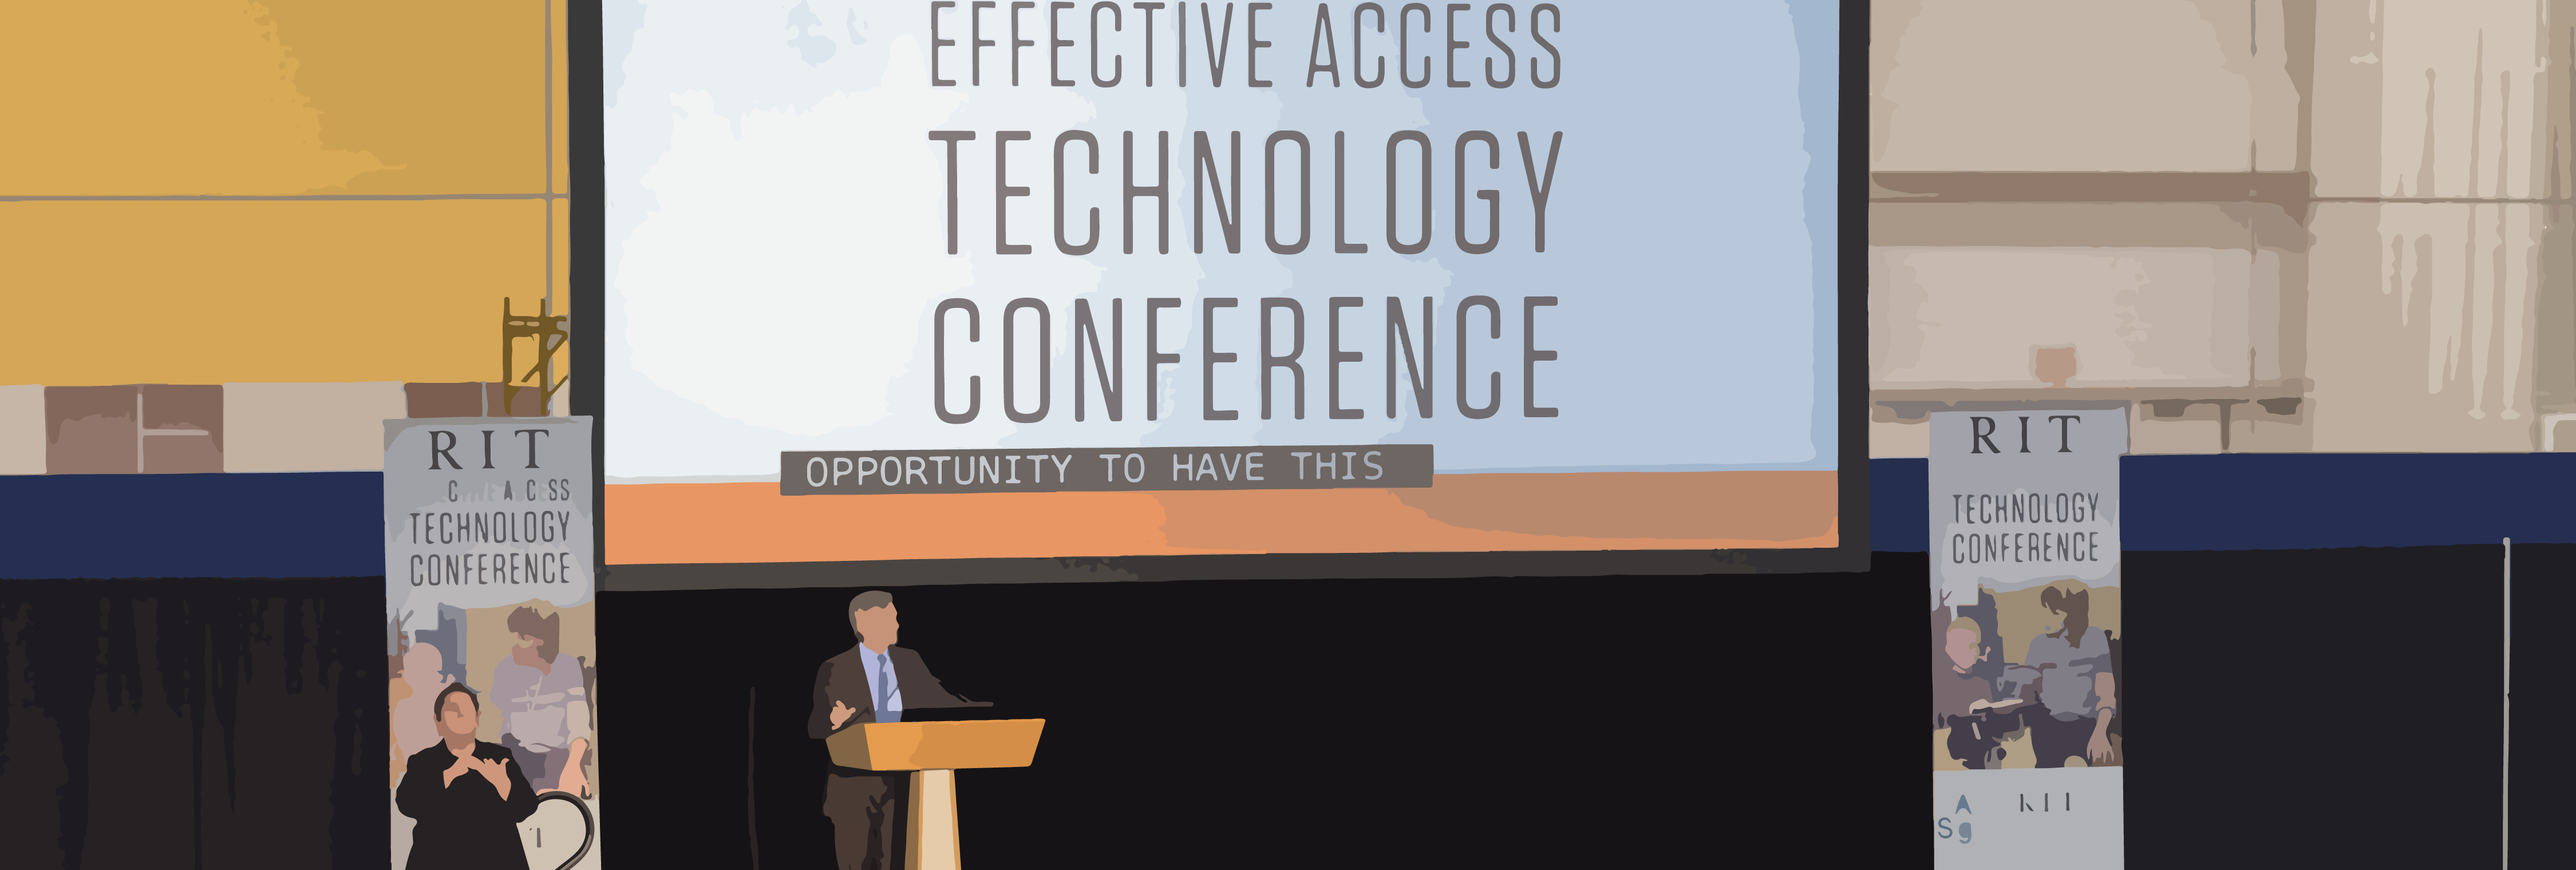 Effective Access Technology Conferences and Workshops Forums to showcase research and development efforts and accomplishments from RIT faculties, students and community partners.